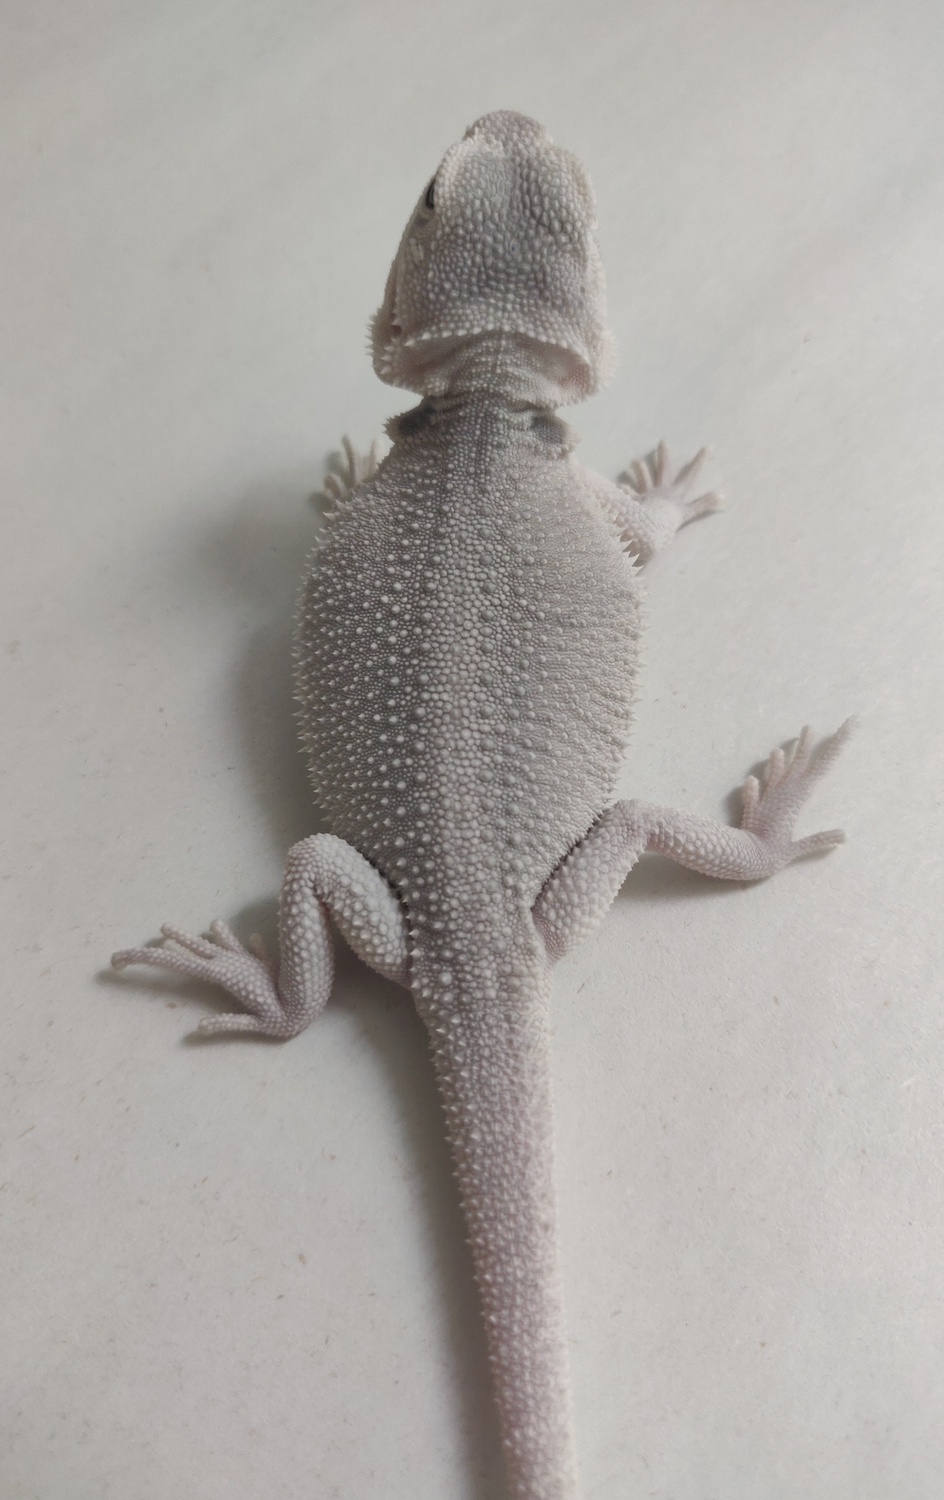 Hypo Dunner Zero Possible Het Wits/Trans Central Bearded Dragon by Phantom Dragons, Inc.